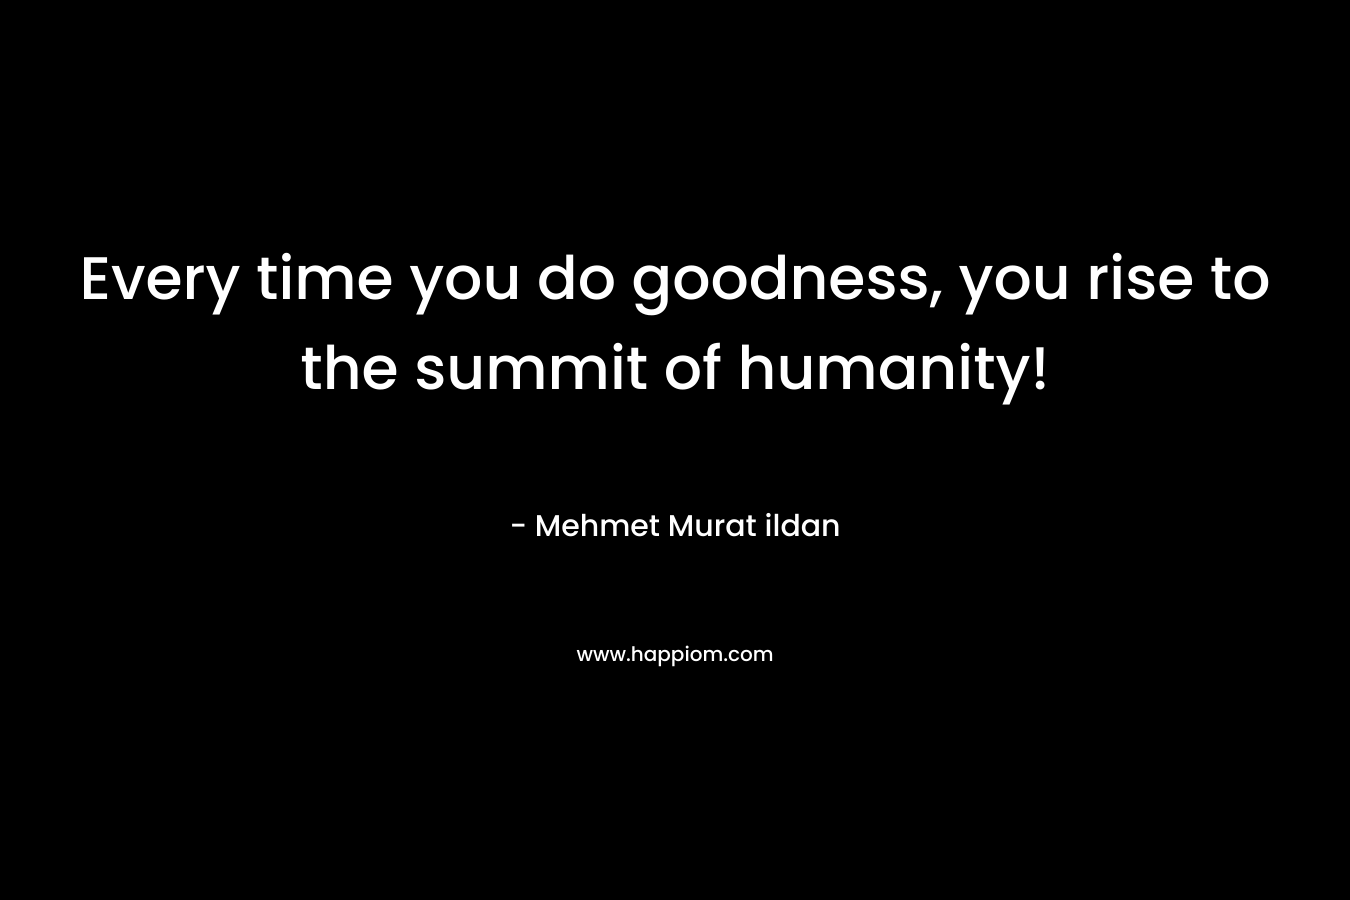 Every time you do goodness, you rise to the summit of humanity!